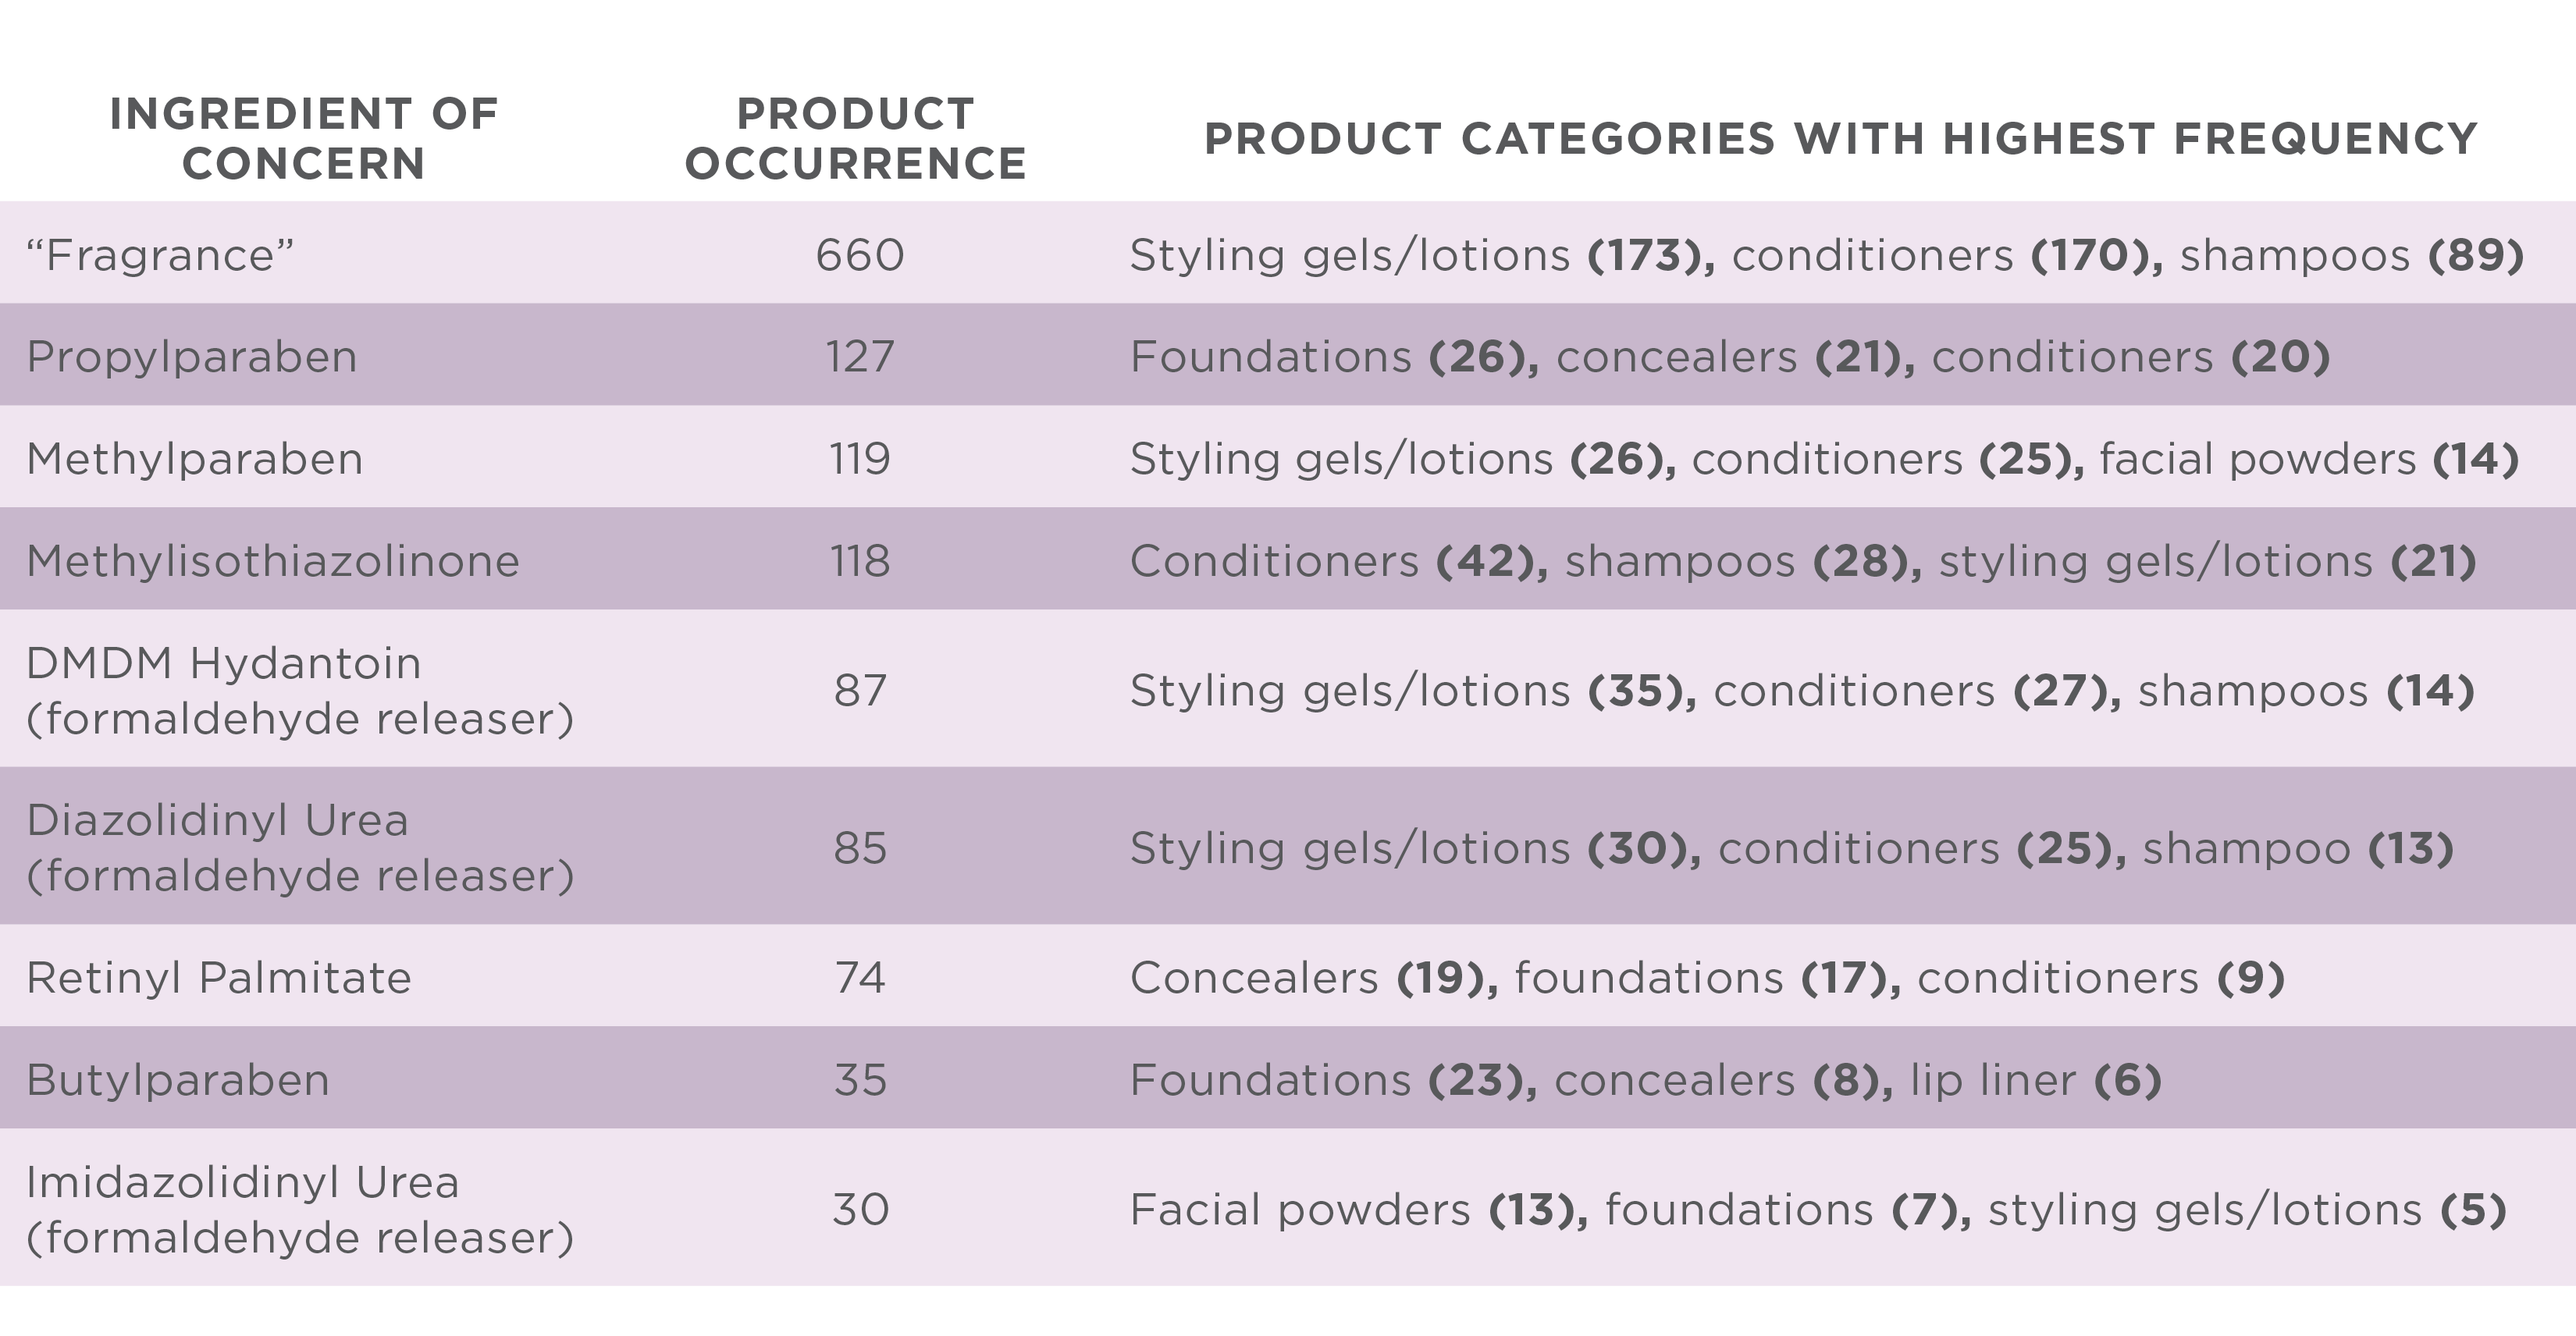 Table showing ingredients of concern and what product categories they appear in